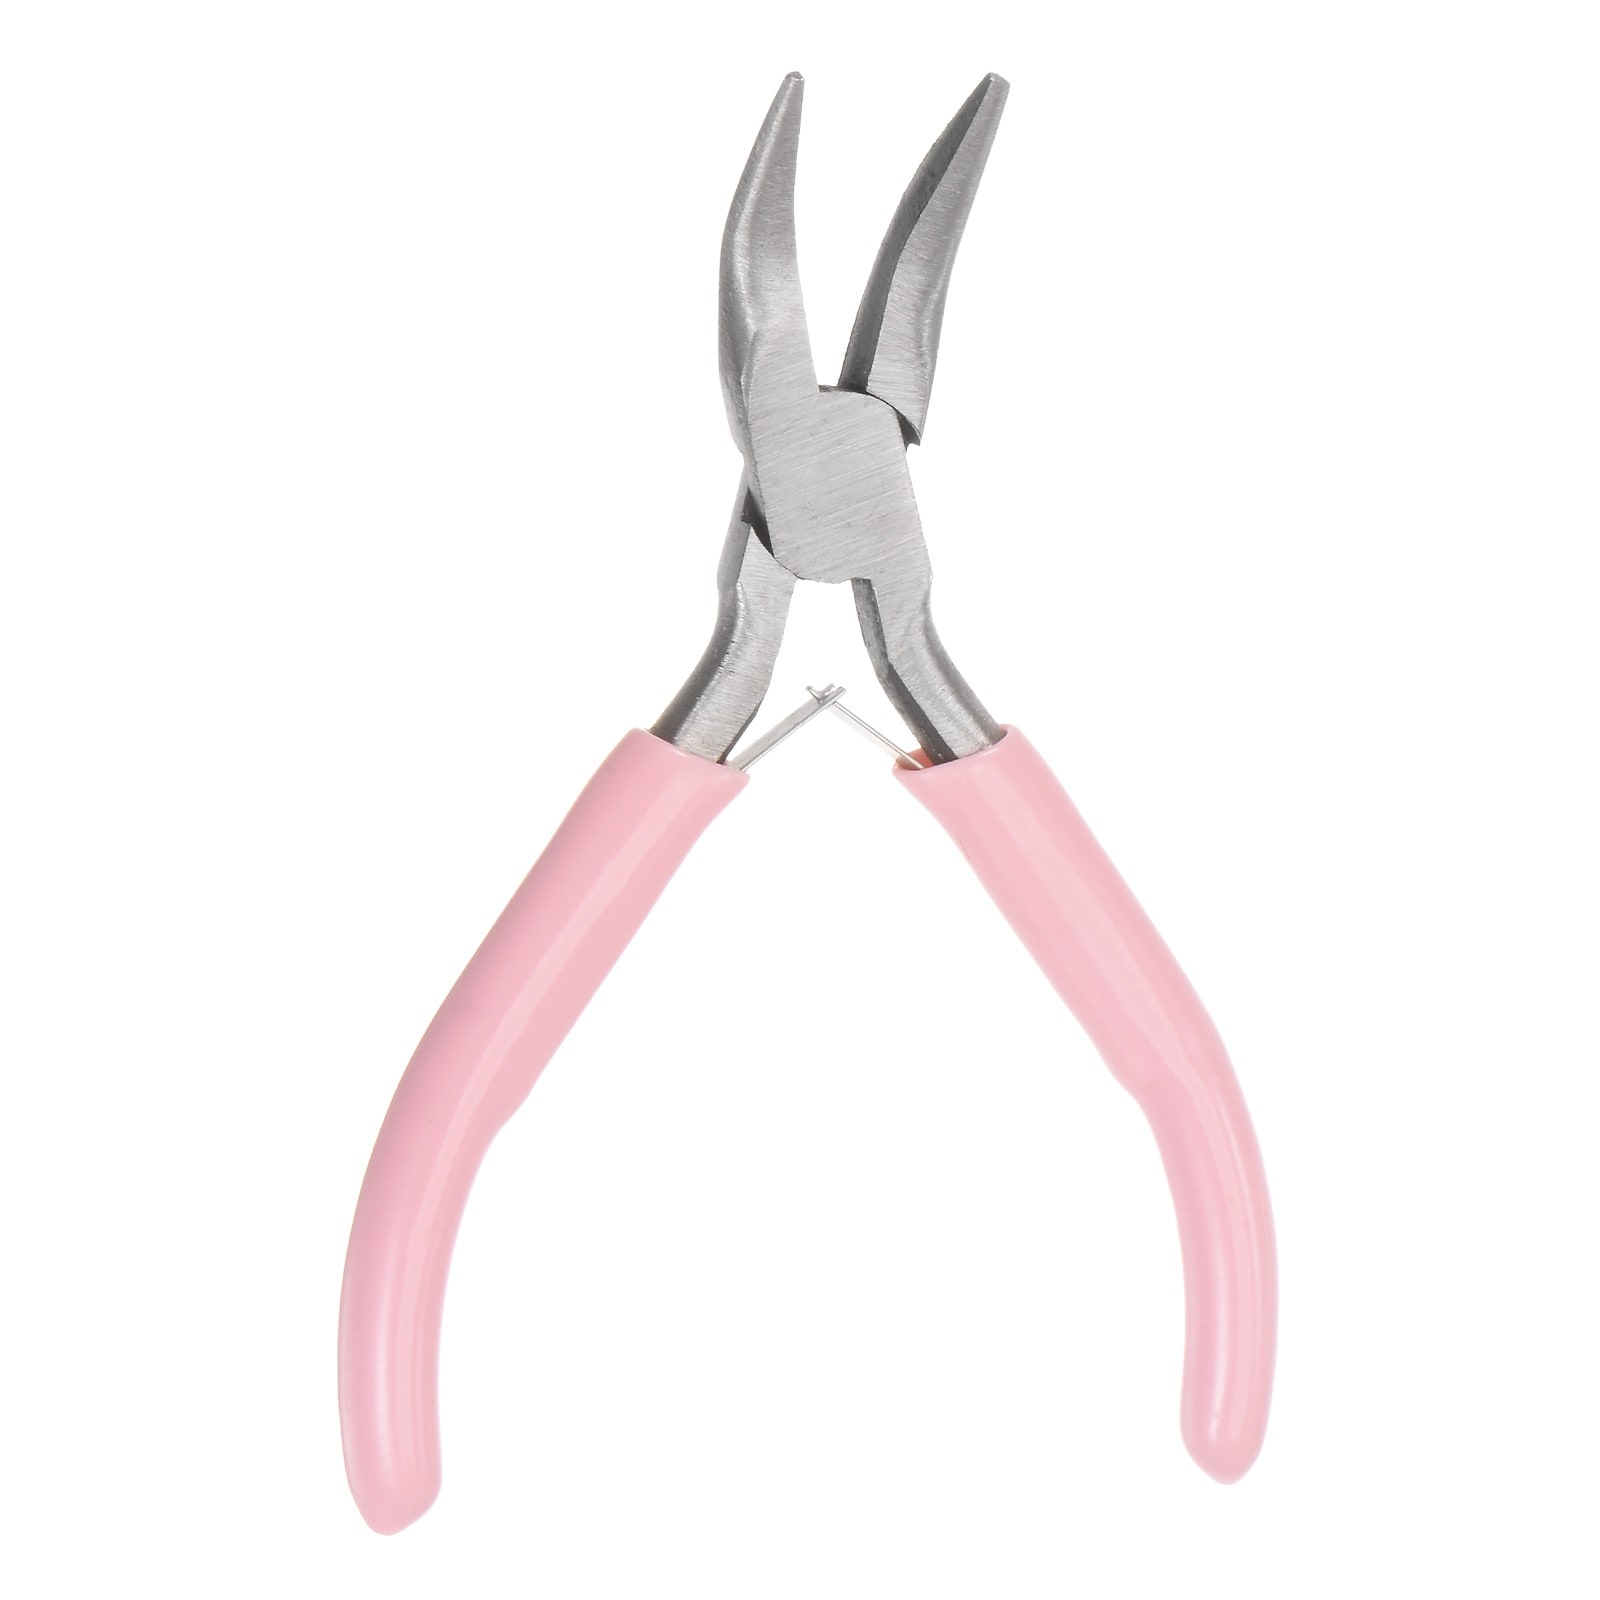 Bent Needle Nose Pliers  Slim Curved Needle Nose Pliers